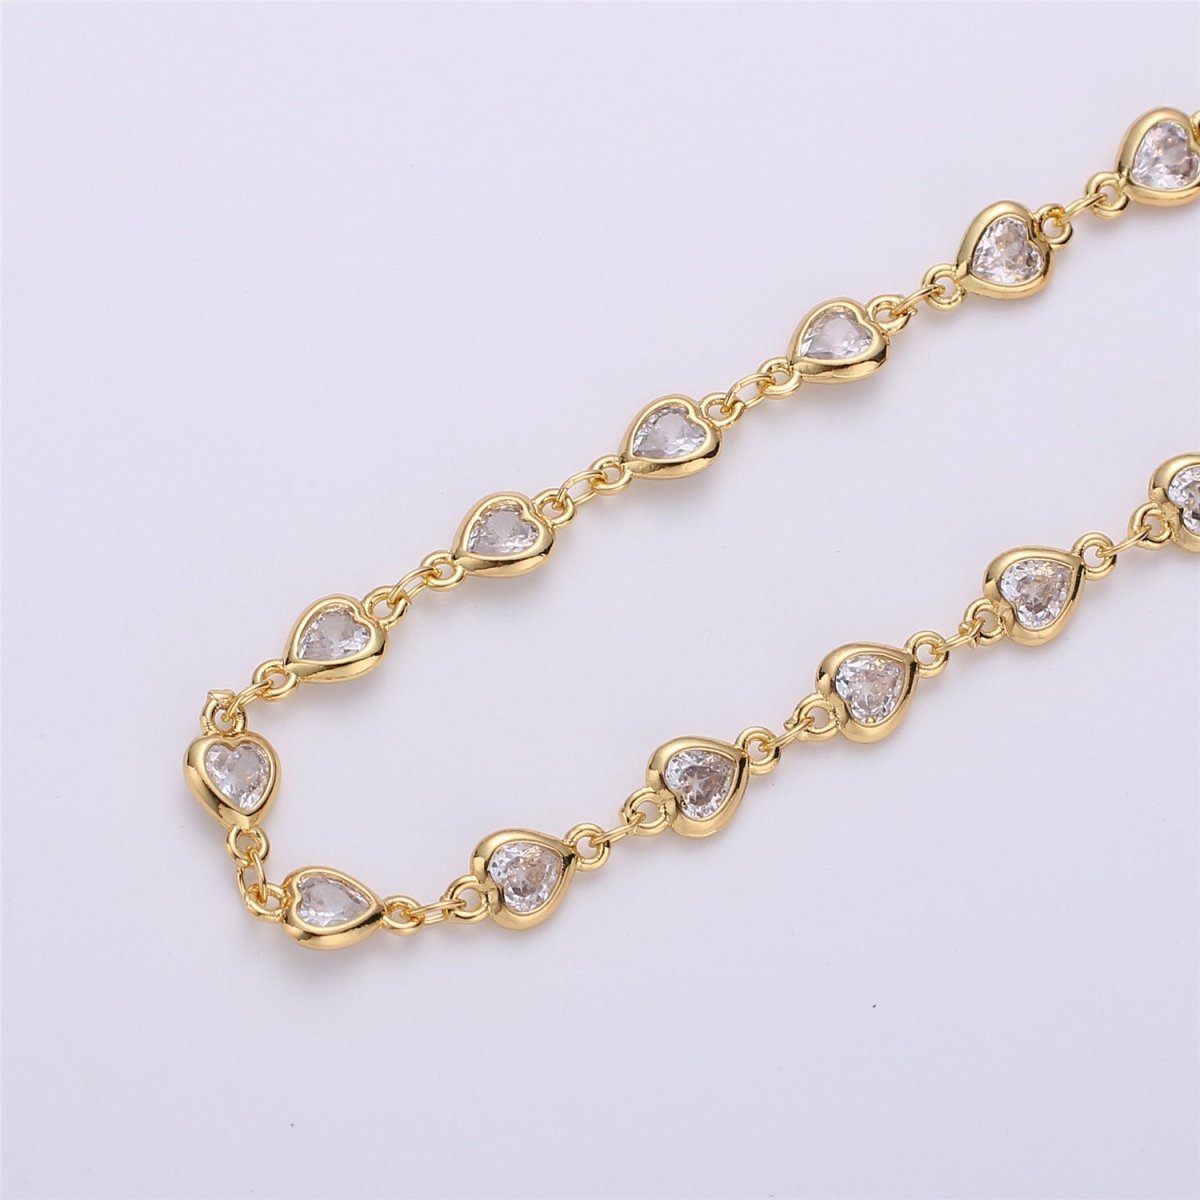 24K Gold Filled Chain Heart CZ Chain by Yard, Bulk Chain By Yard, Cubic Chains, Tiny CZ Chains, Ideal for Lariat Necklace Long Necklace, White Gold Filled, DESIGNED Chain | ROLL-117, ROLL-118 Clearance Pricing - DLUXCA